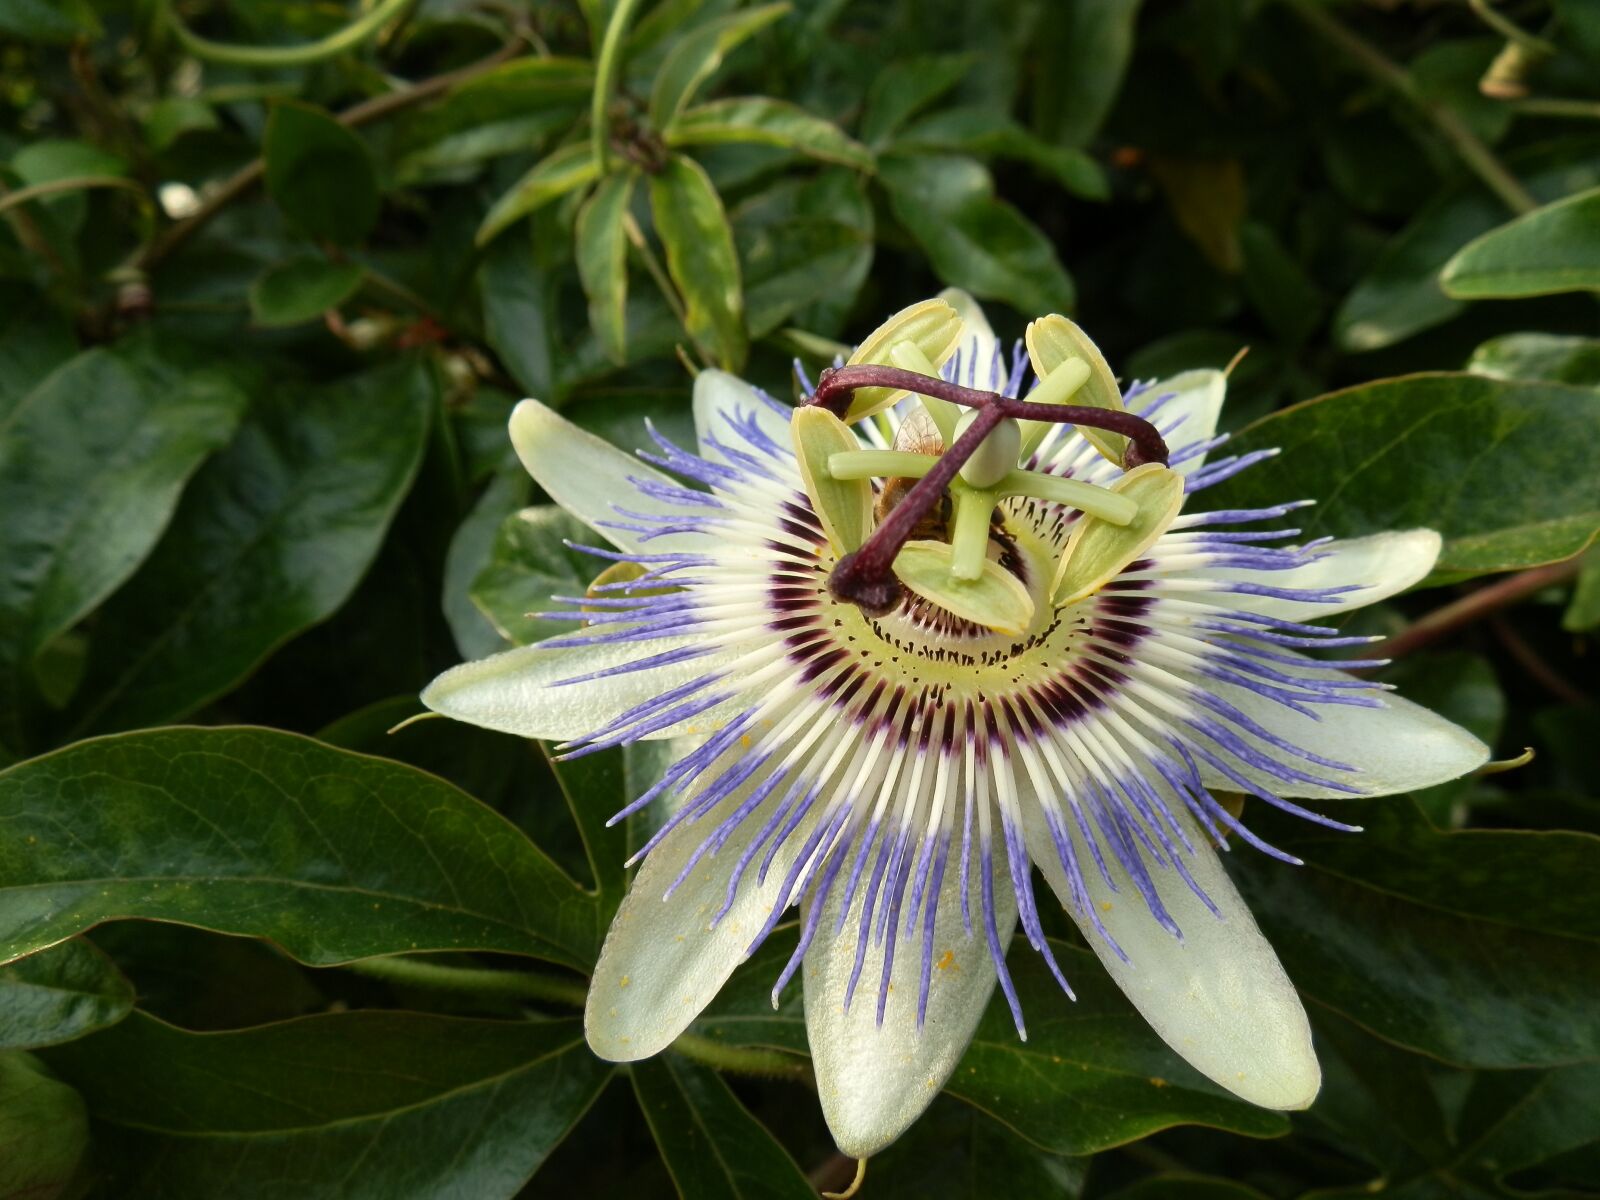 Olympus SZ-10 sample photo. Passionflower, pretty, flower photography